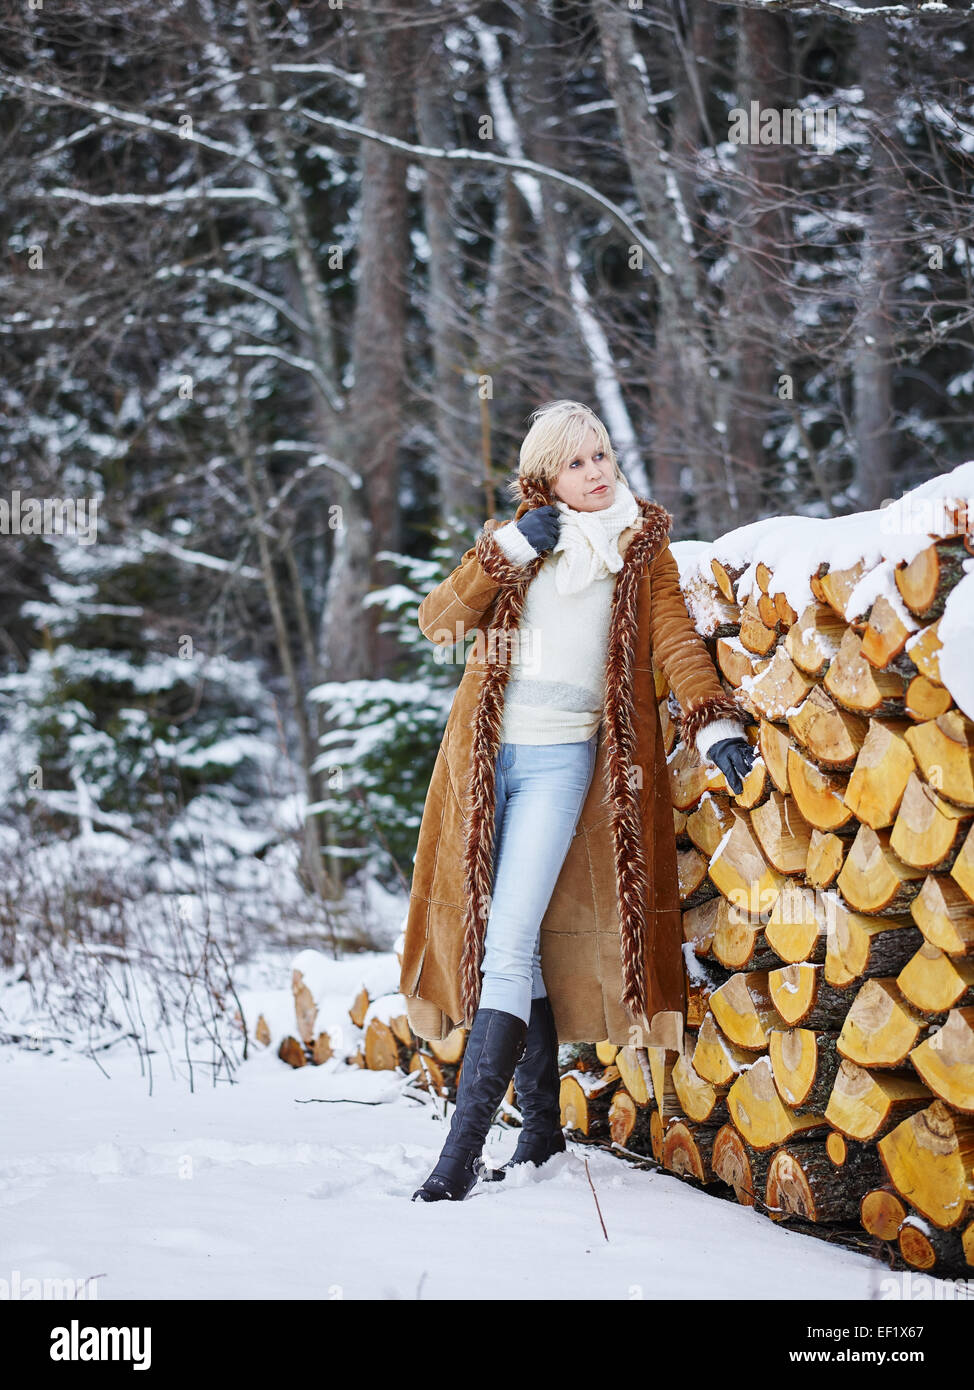 Fashionable mature adult woman wearing winter clothes, rural scene Stock Photo